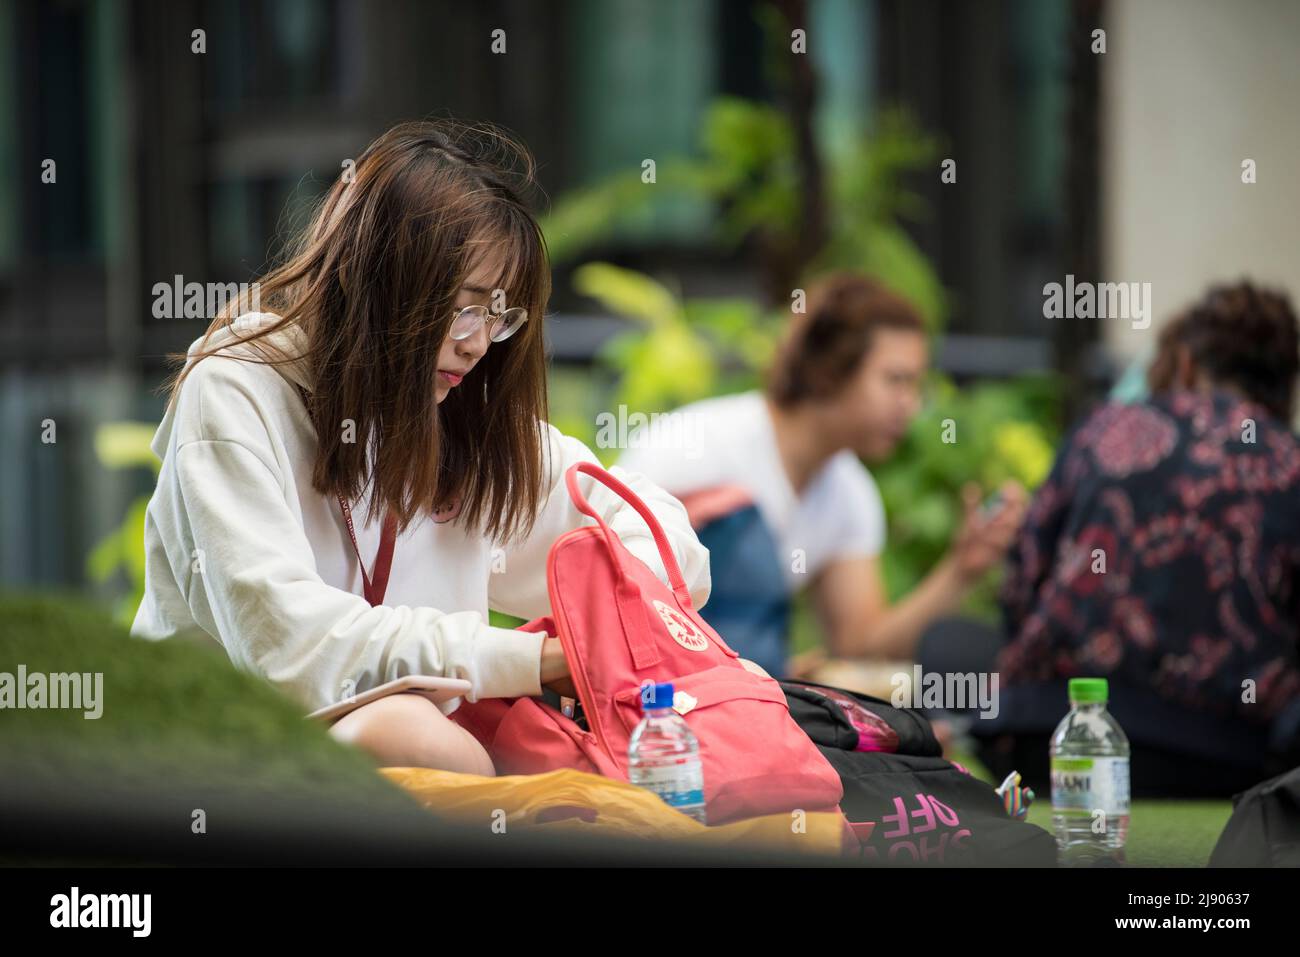 Singapore, Singapore - September 08, 2019: Students The Lasalle College of the Arts in Singapore. Stock Photo